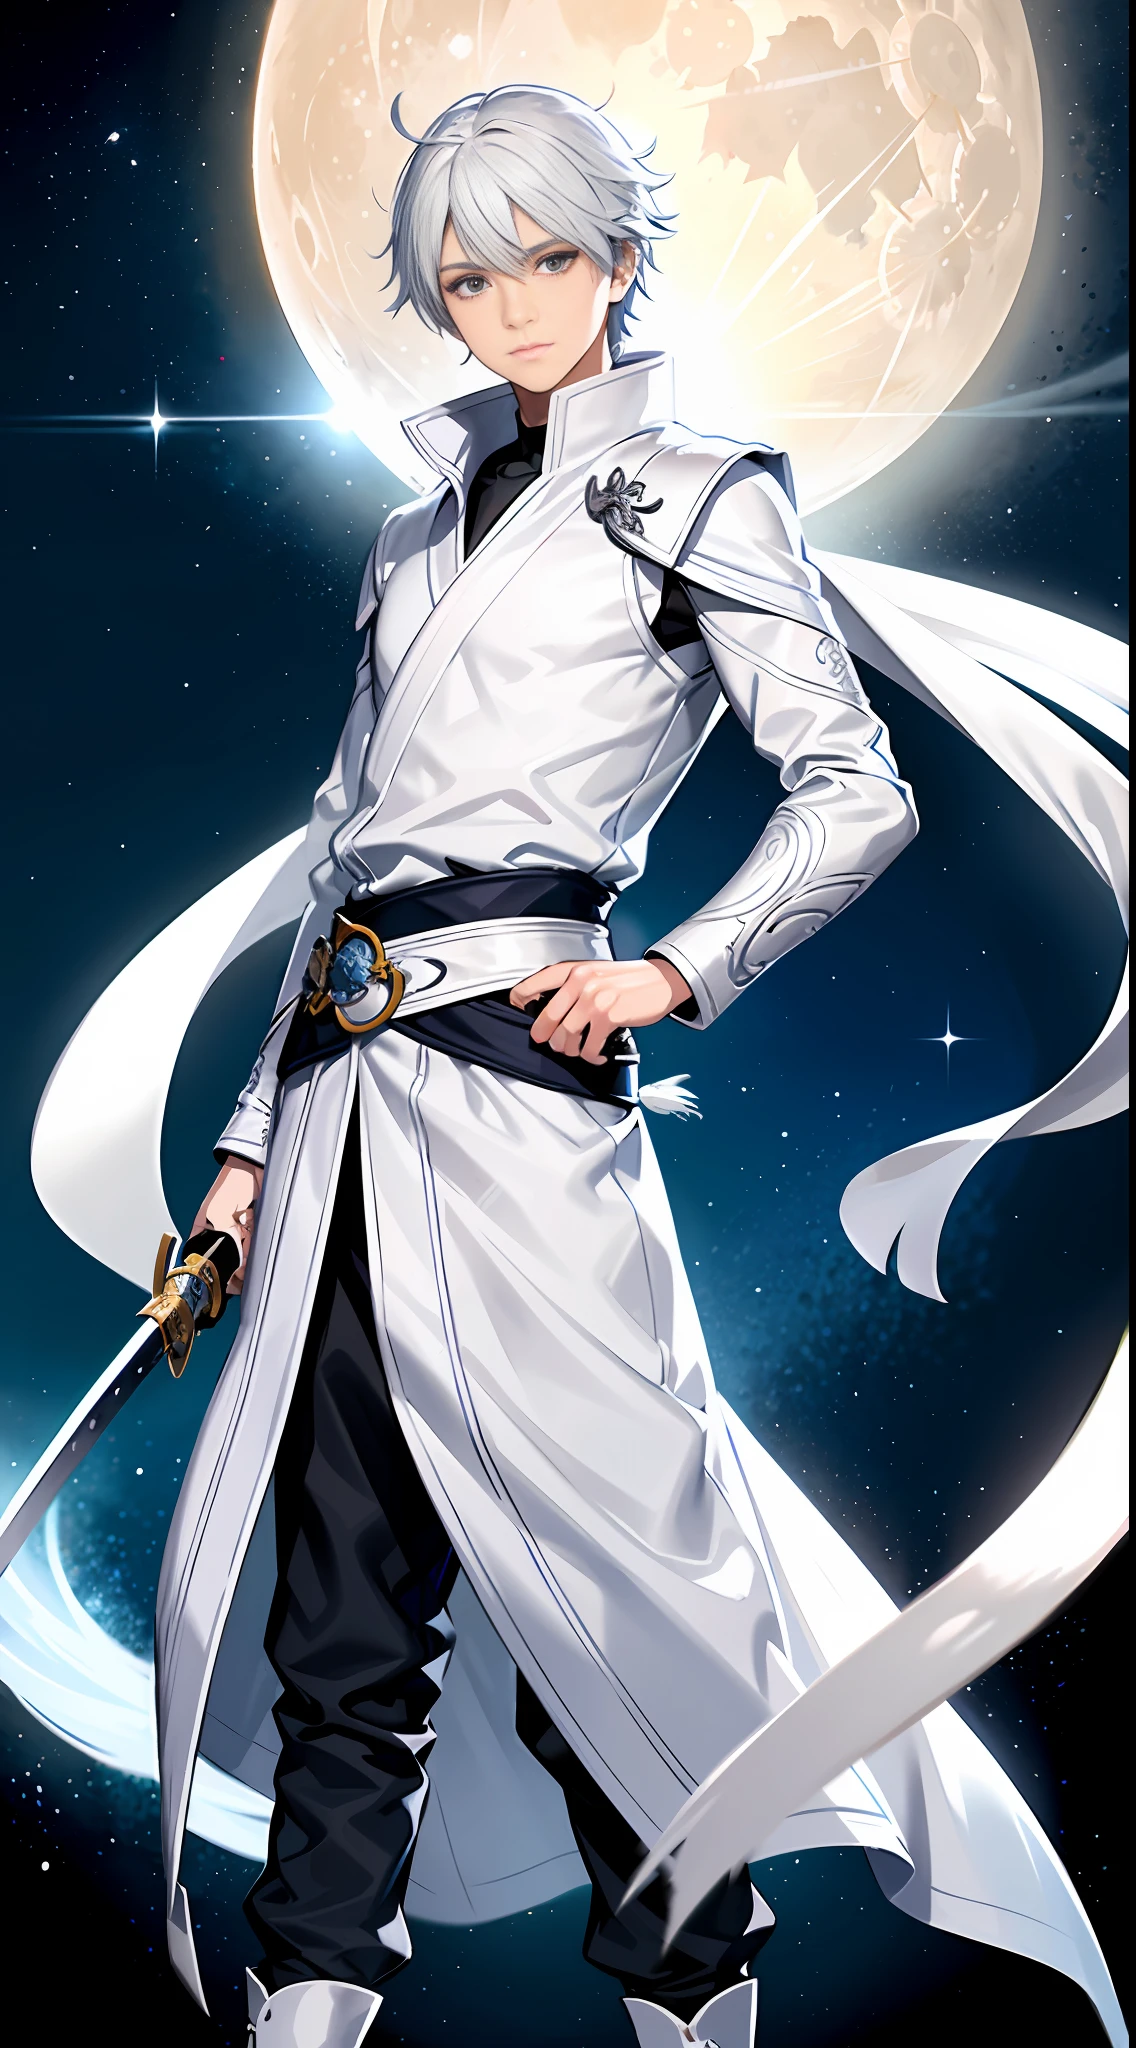 A 13-year-old boy with white hair and silver eyes, known for having great combat skills with ice magic. He wears white clothes like the light of the full moon with a long white scarf around his neck, in addition he also carries a katana with the blessing of the moon goddess that he carries on the right side of his waist